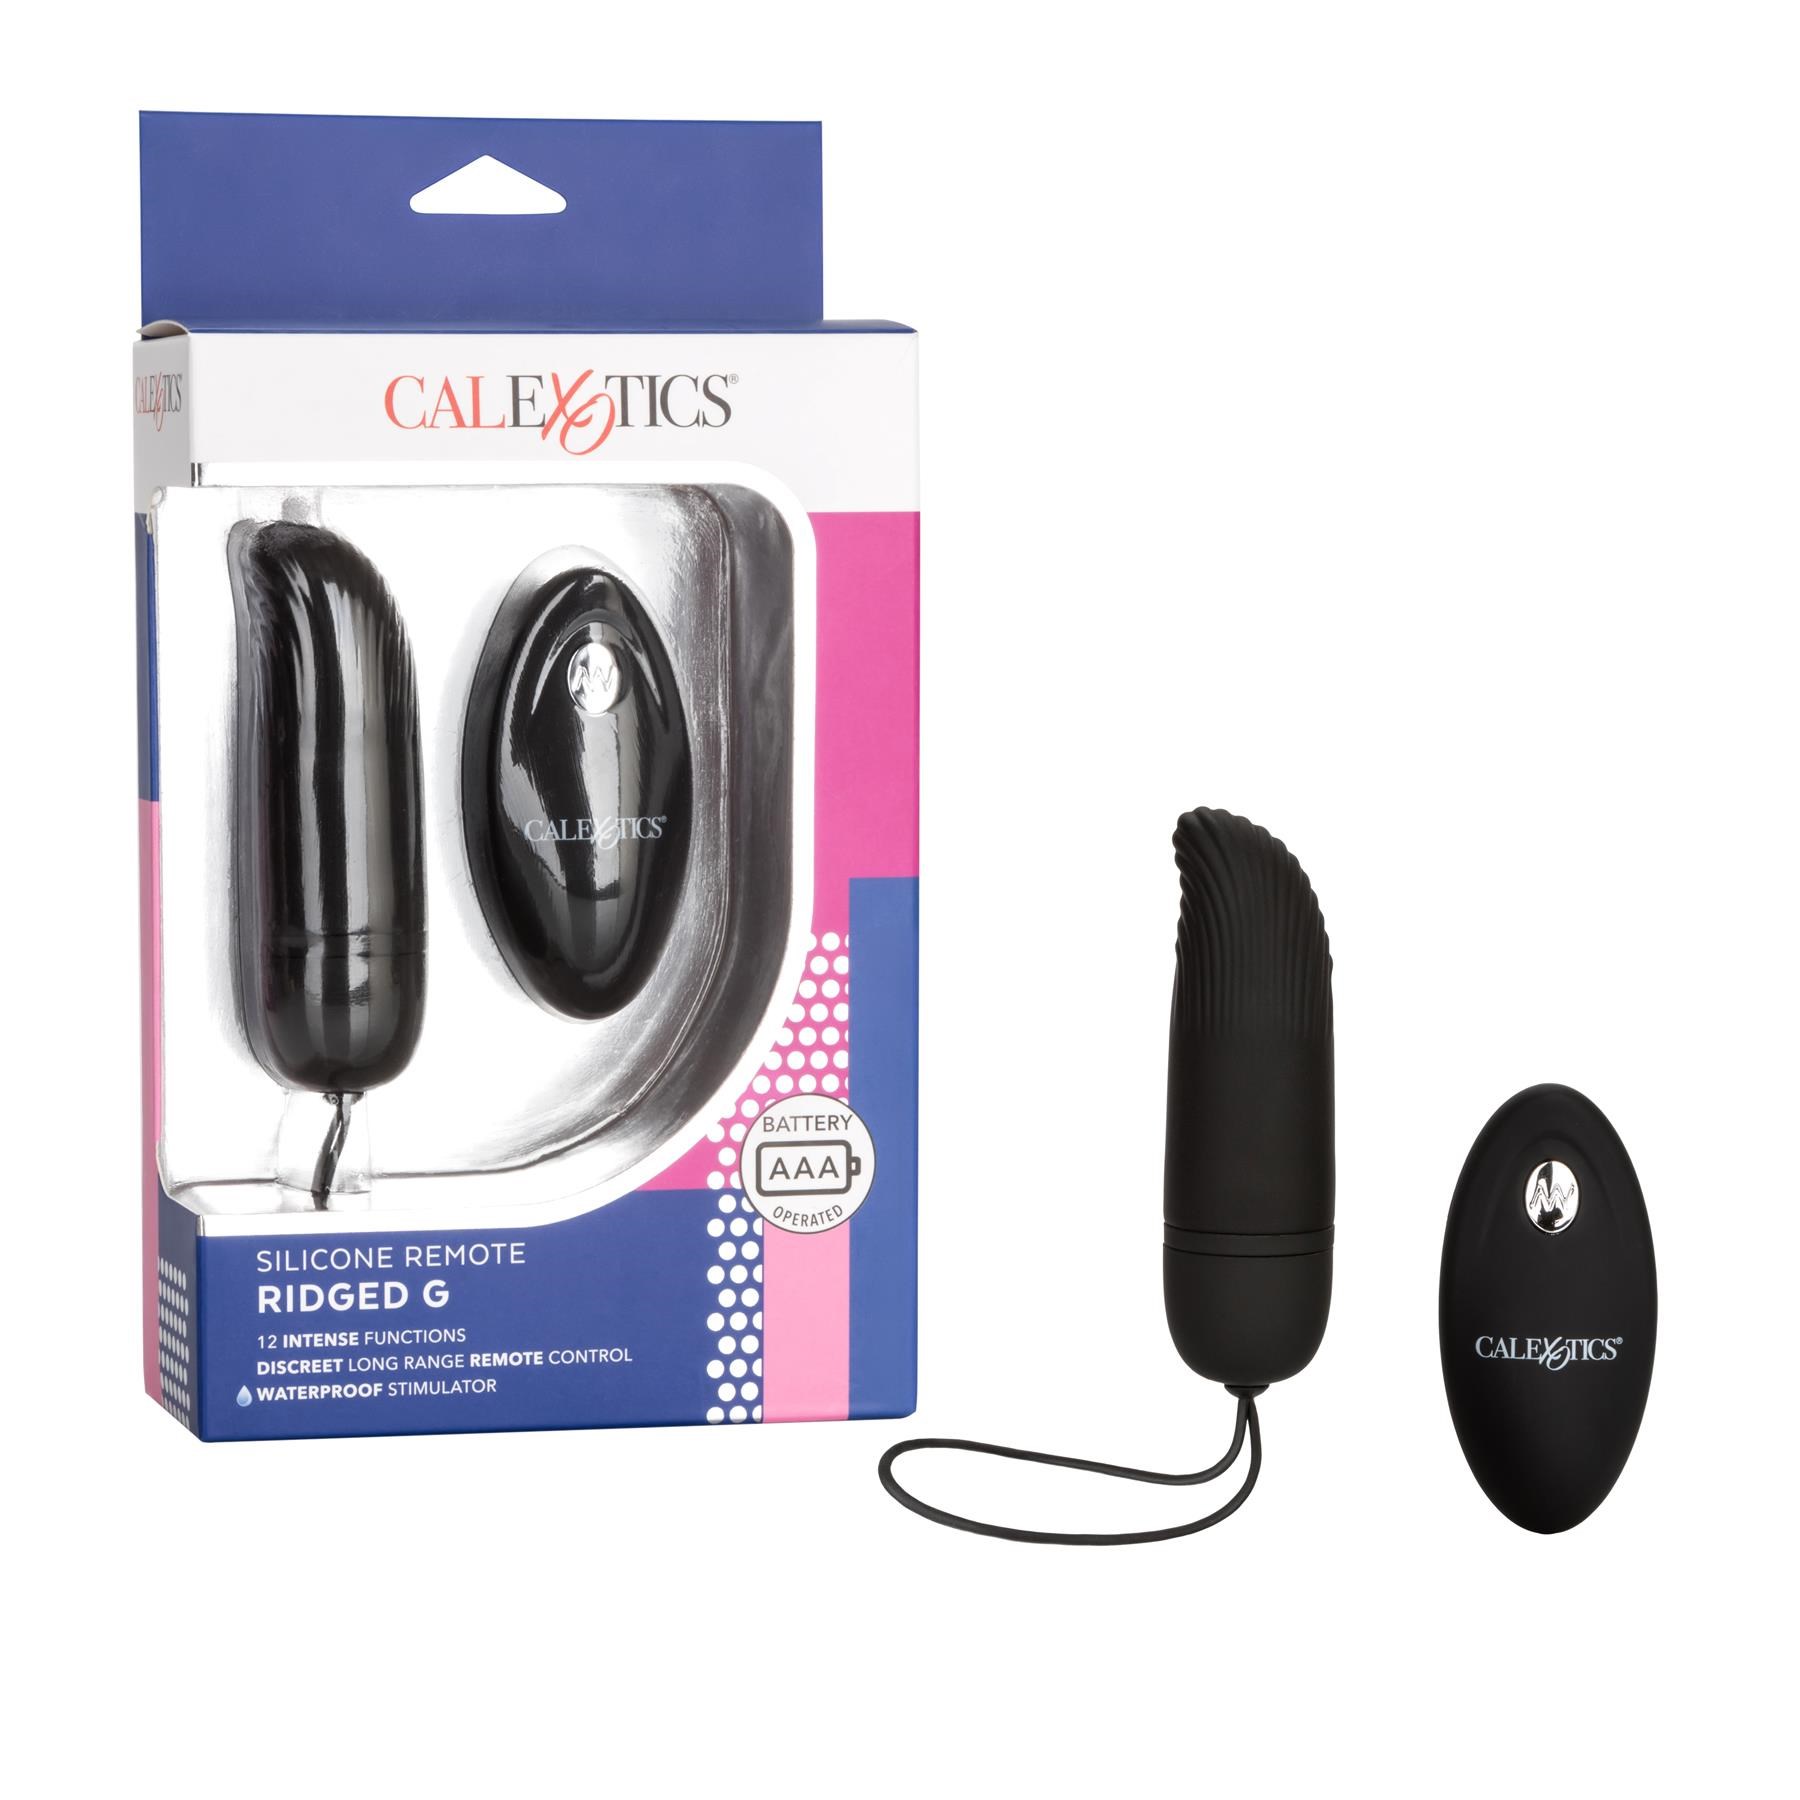 Silicone Remote Ridged G Bullet Vibrator - Product and Packaging